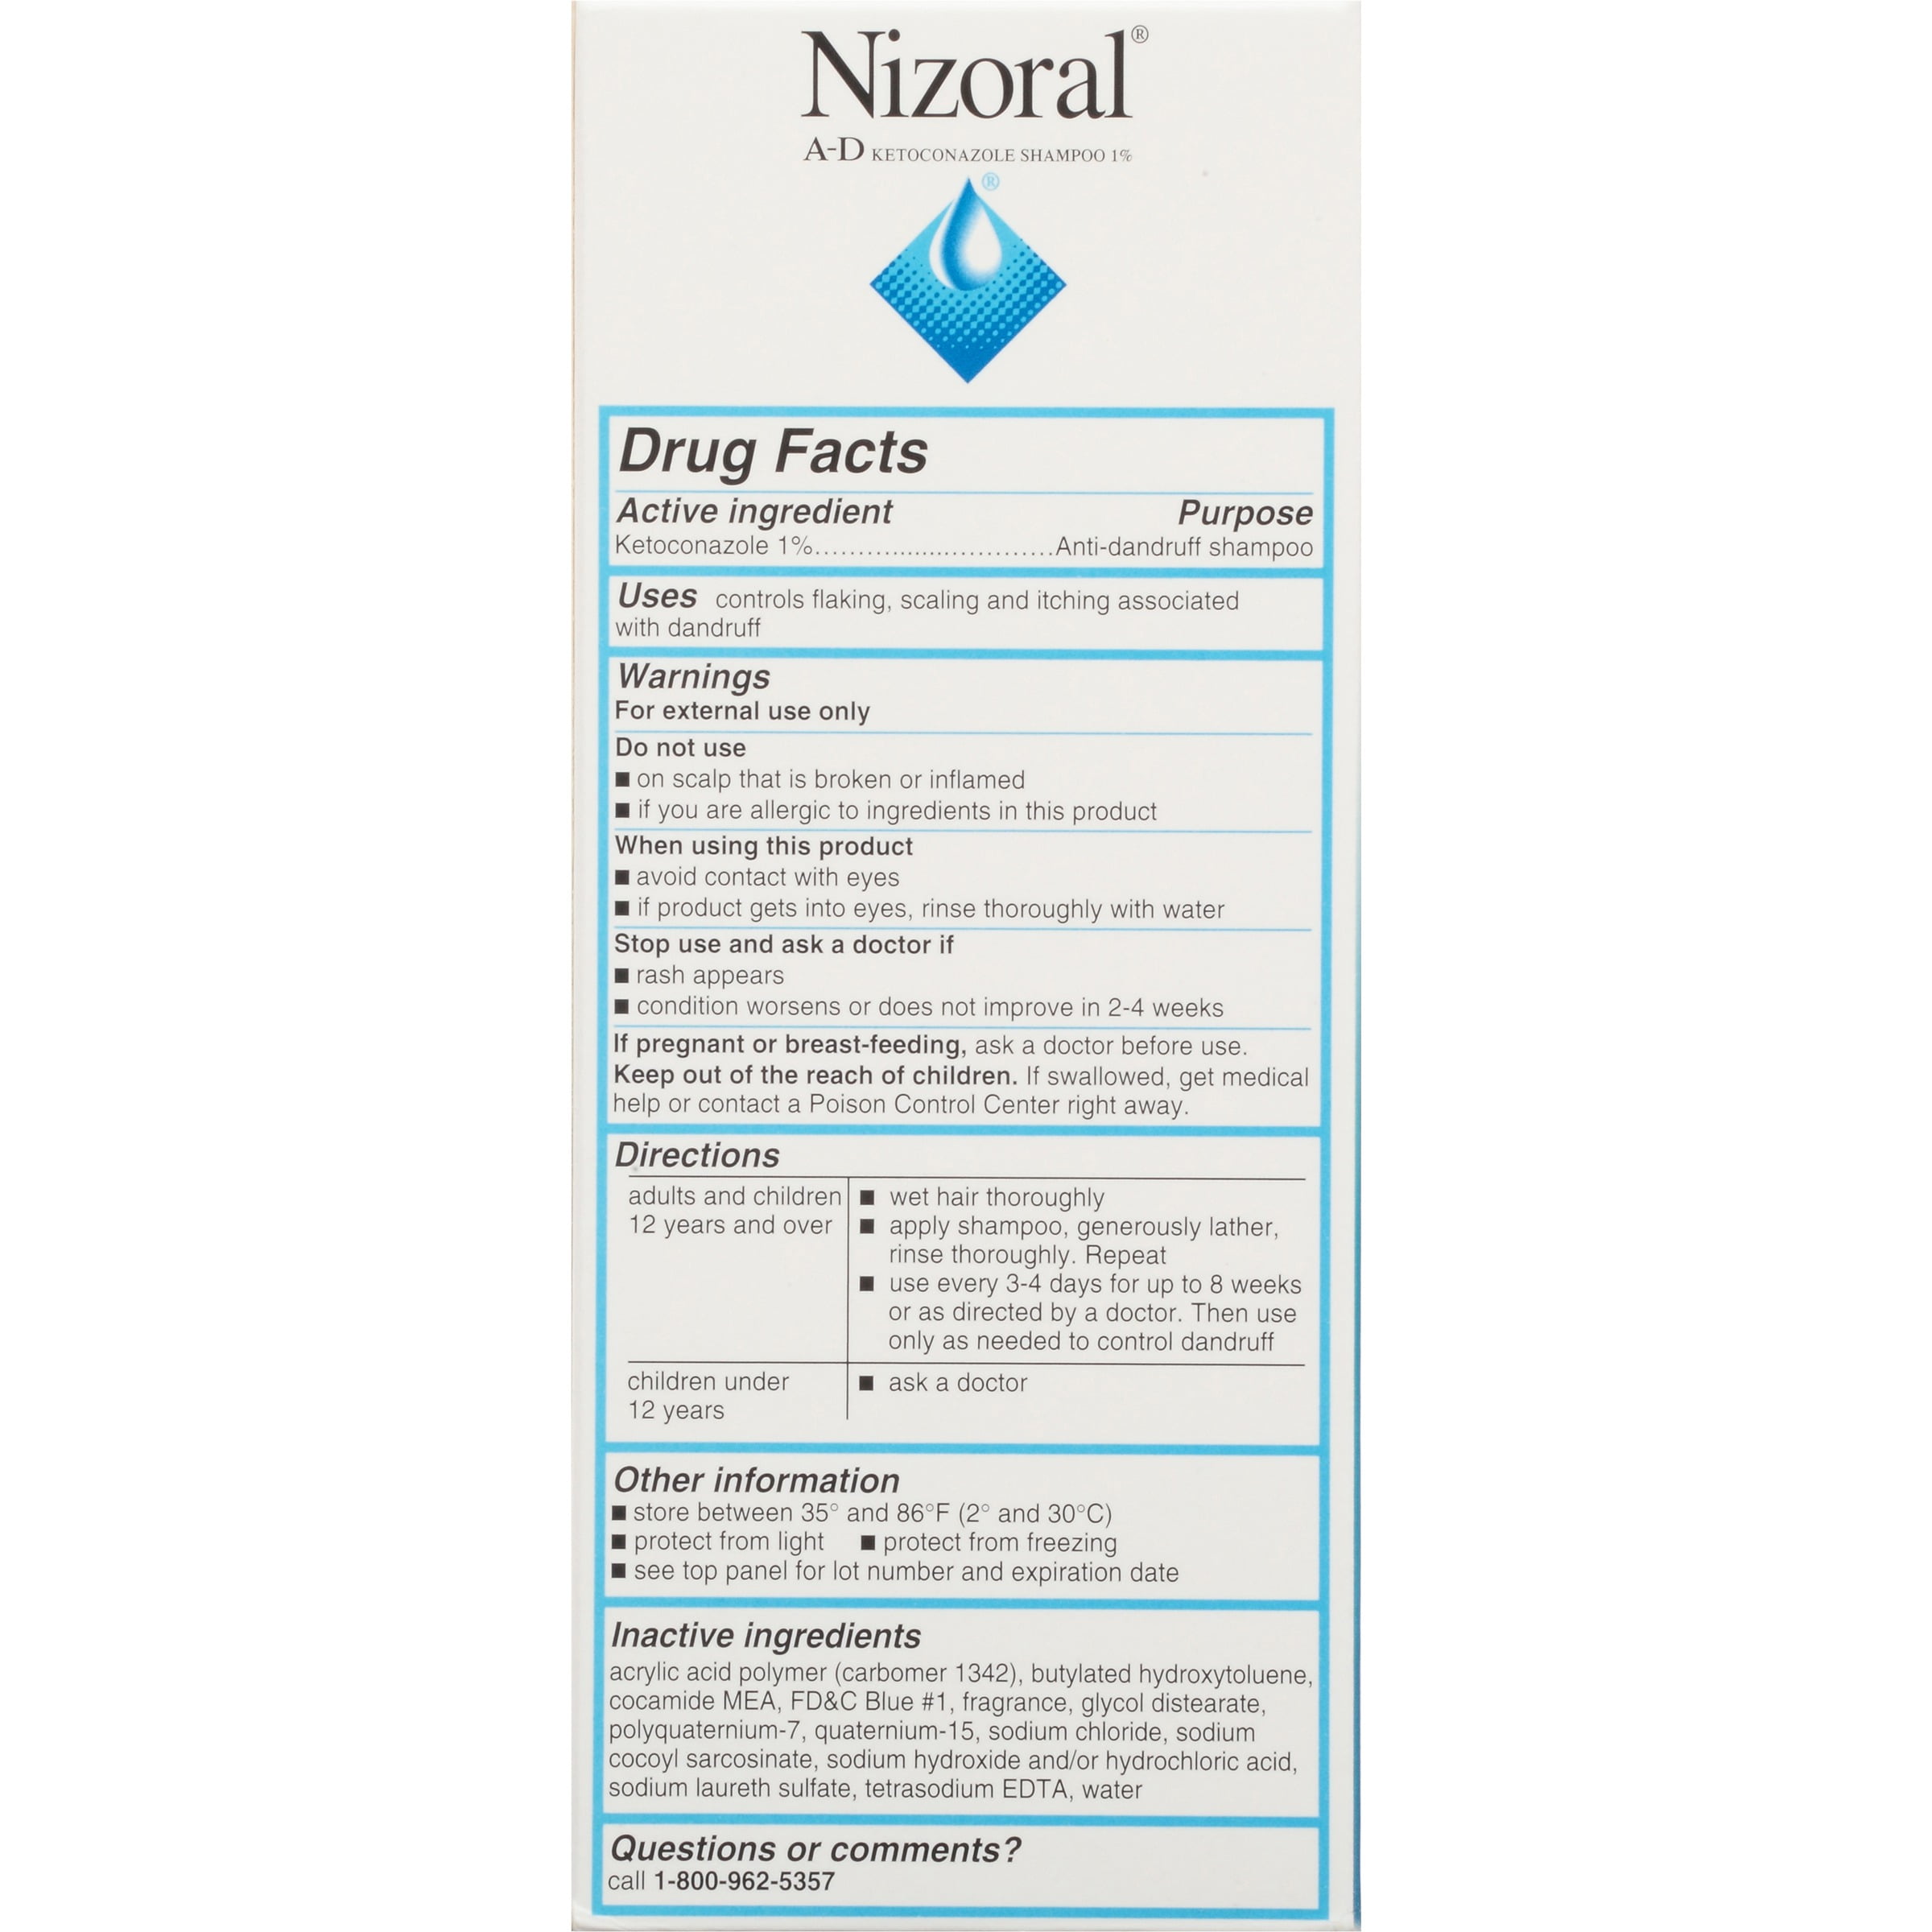 diflucan 150 mg tablet in india